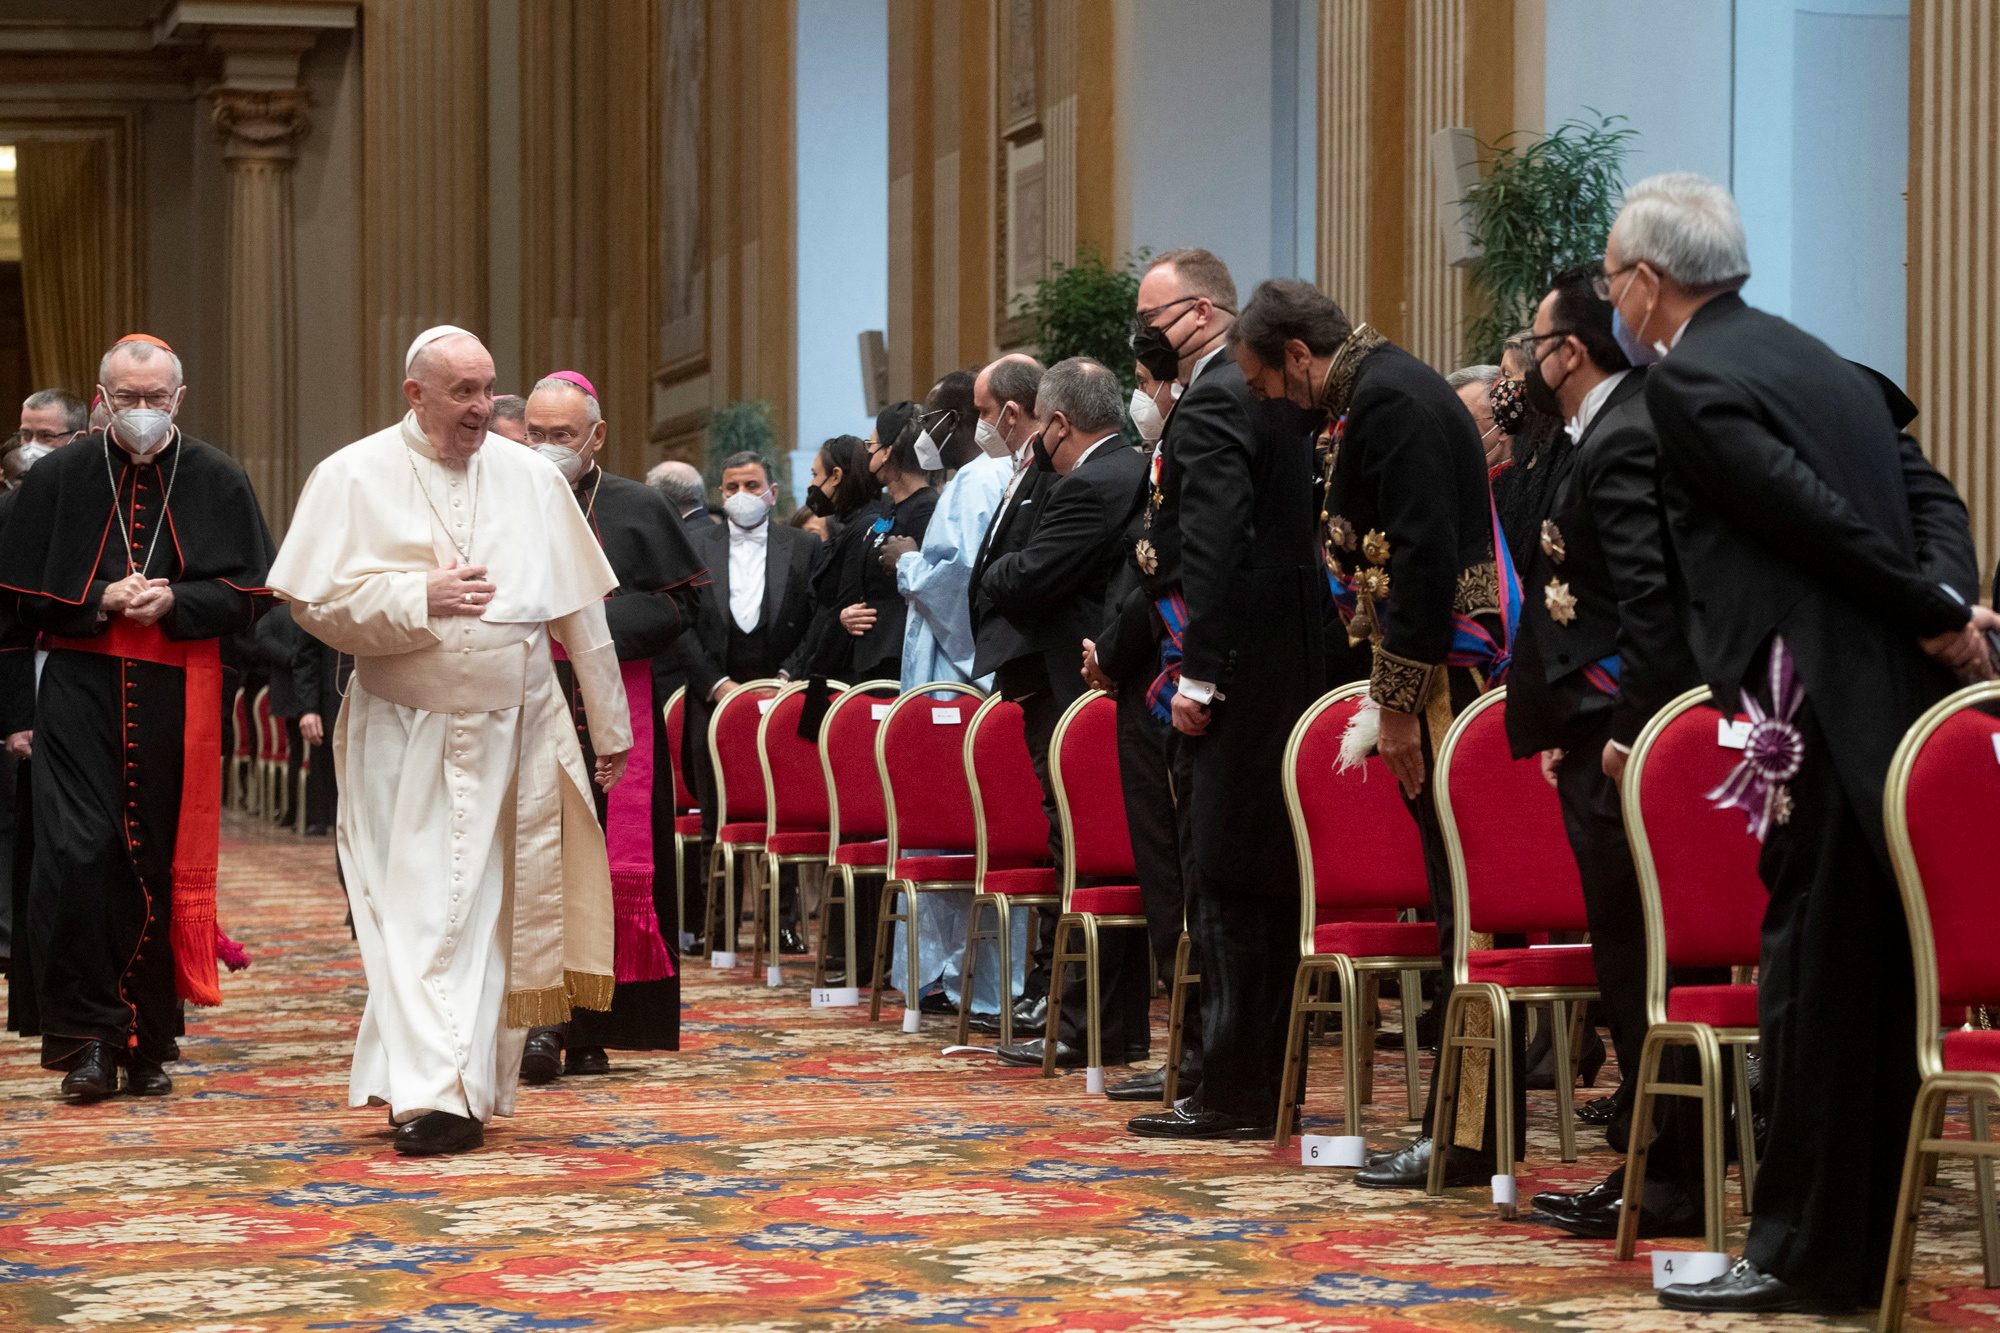 Pope Francis backs COVID-19 vaccine drives, hits ideological misinformation